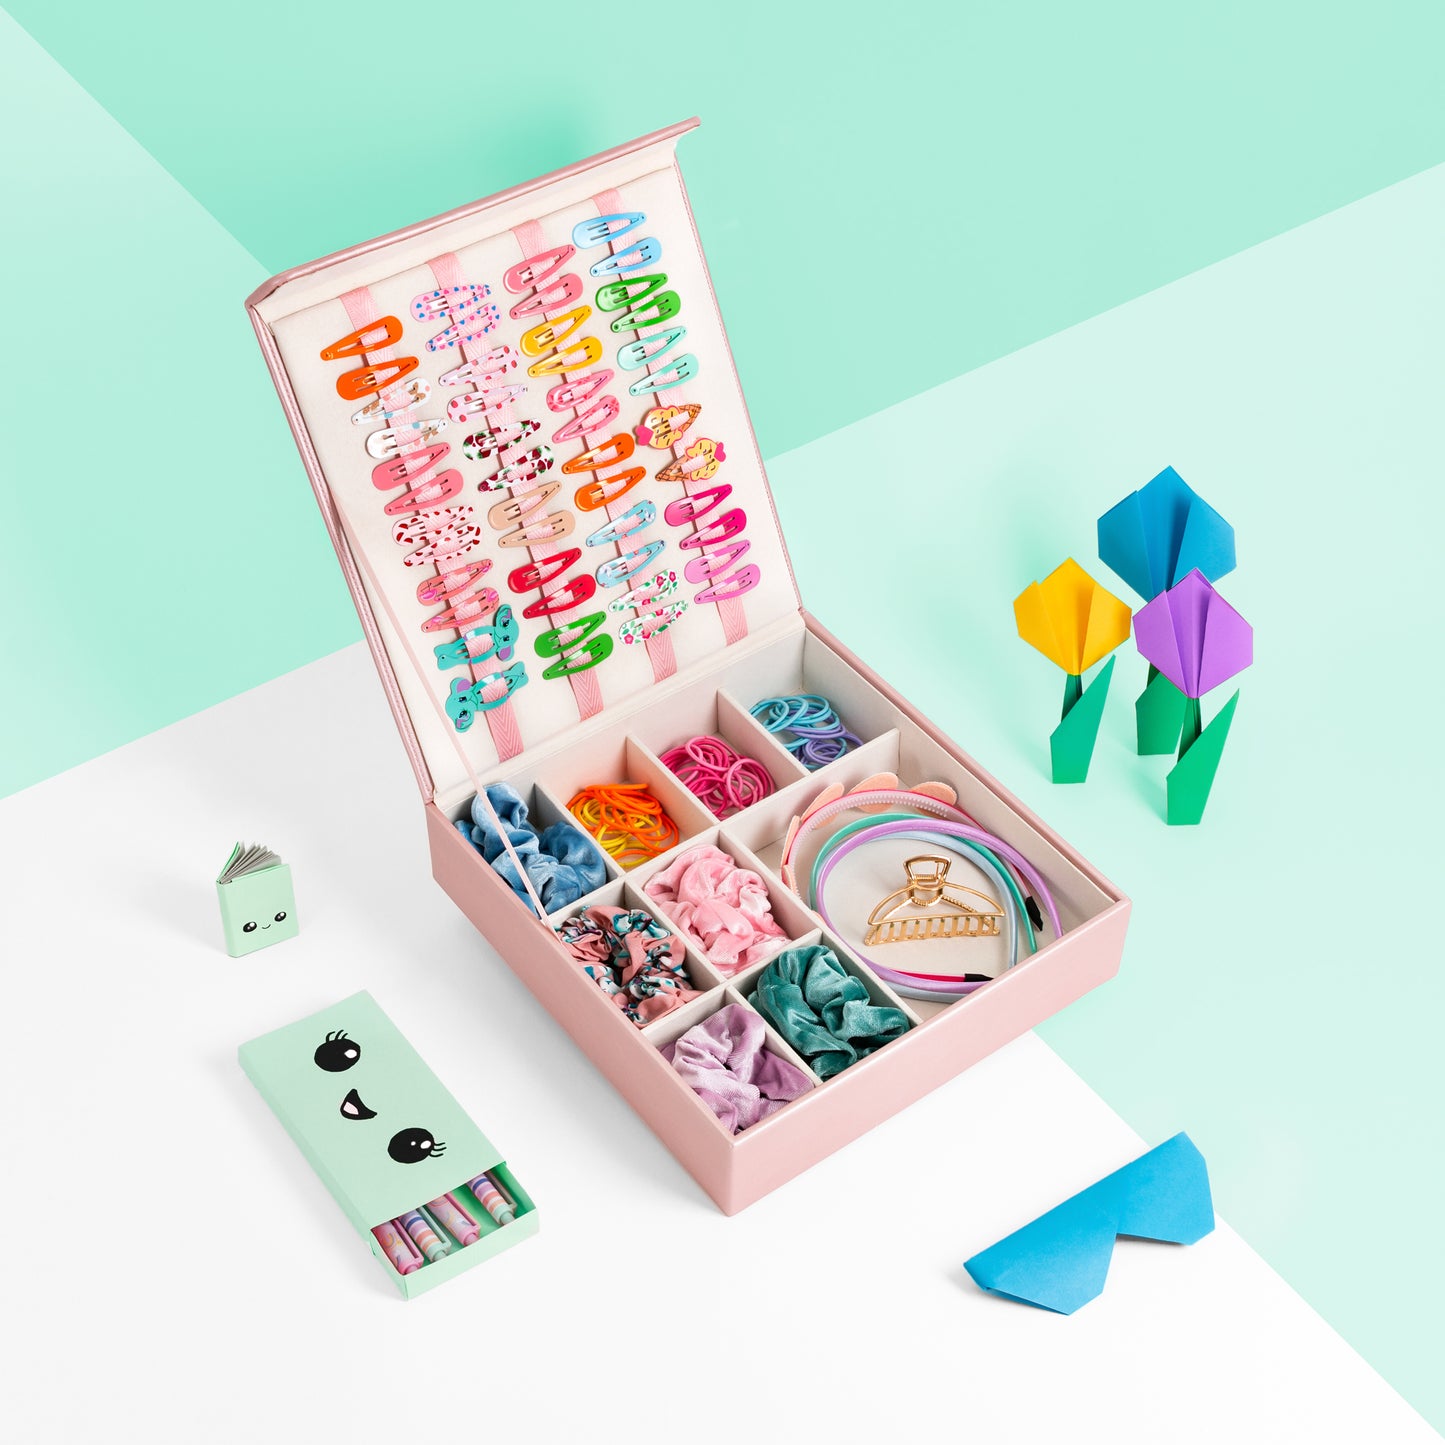 Pink hair accessory storage box is shown against a mint green and white background. The image shows the box with hair clips attached to the internal ribbons, and hair bobbles, head bands and scrunchies are neatly organised in the bottom grid compartment. There are origami paper works surrounding it and a cute girls pen set